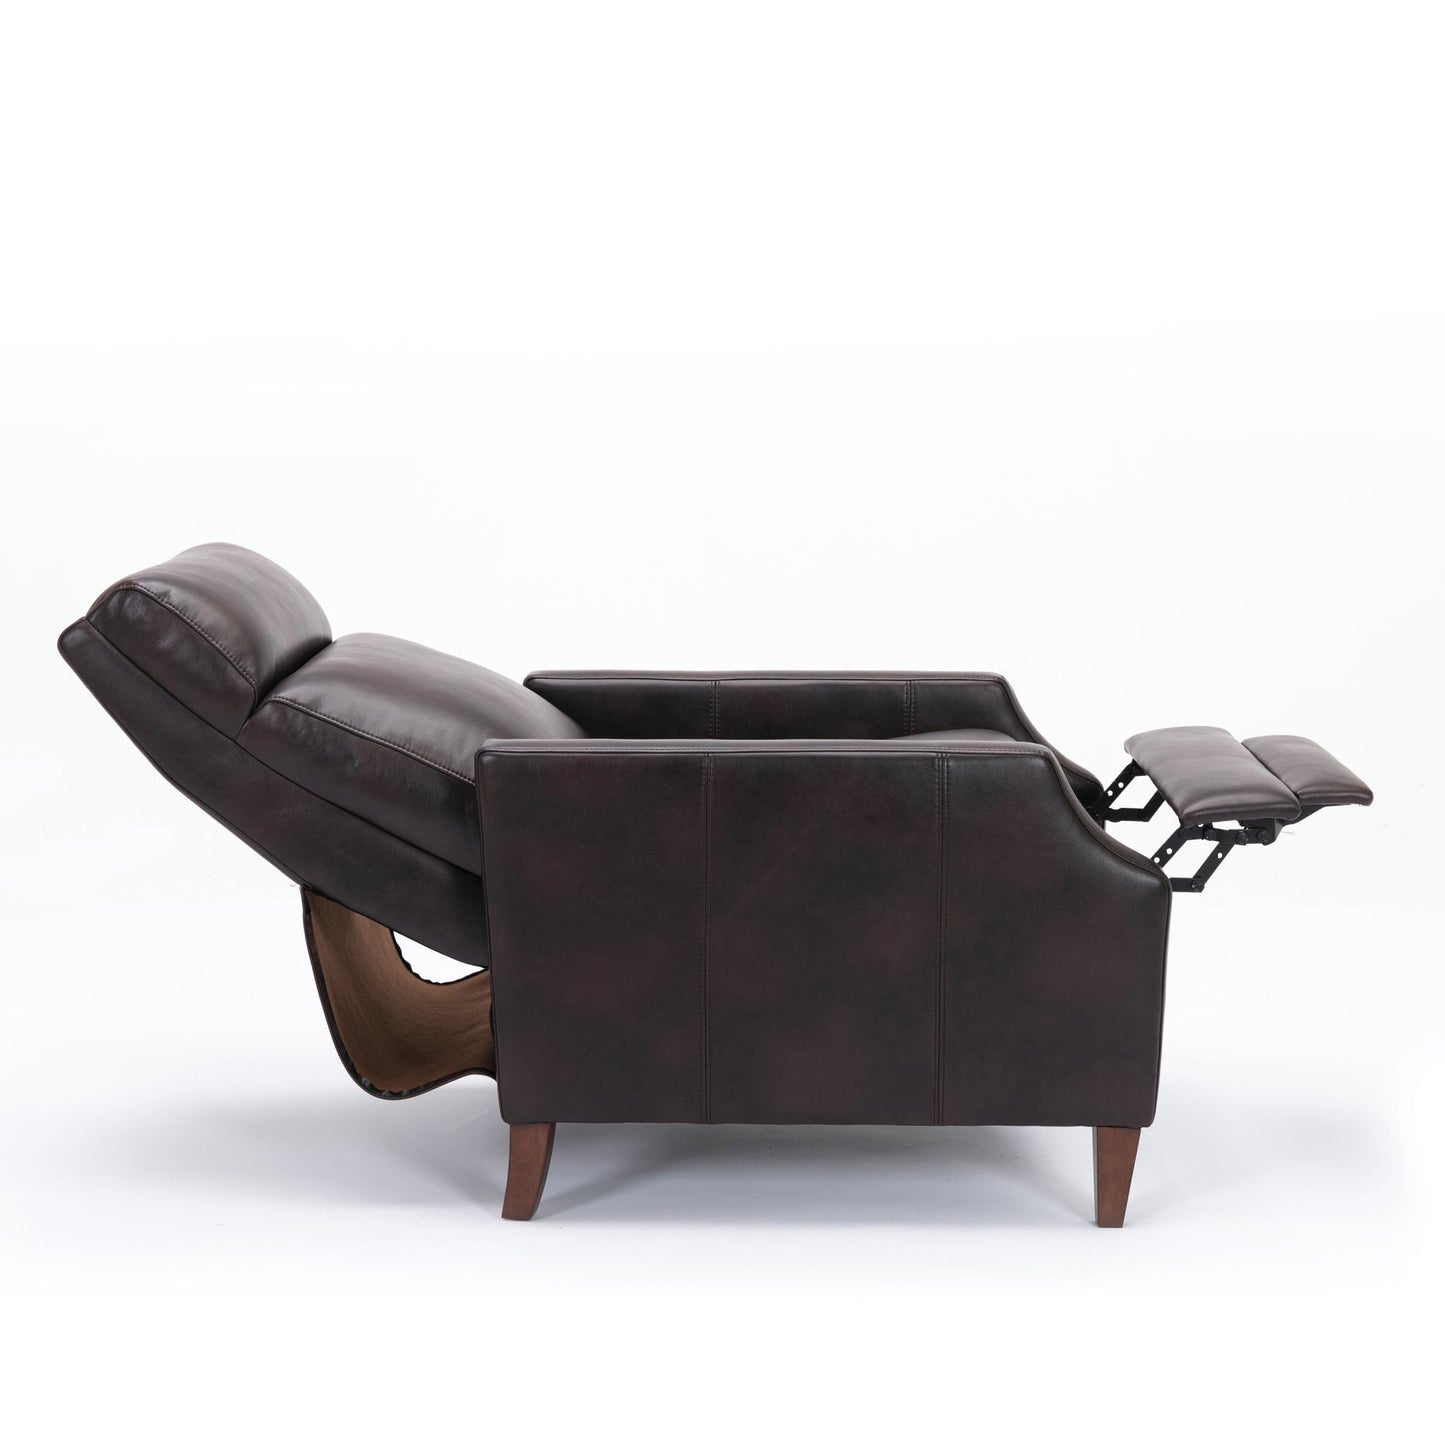 Biscoe Push Back Recliner - Burnished Brown Home Decor by Design